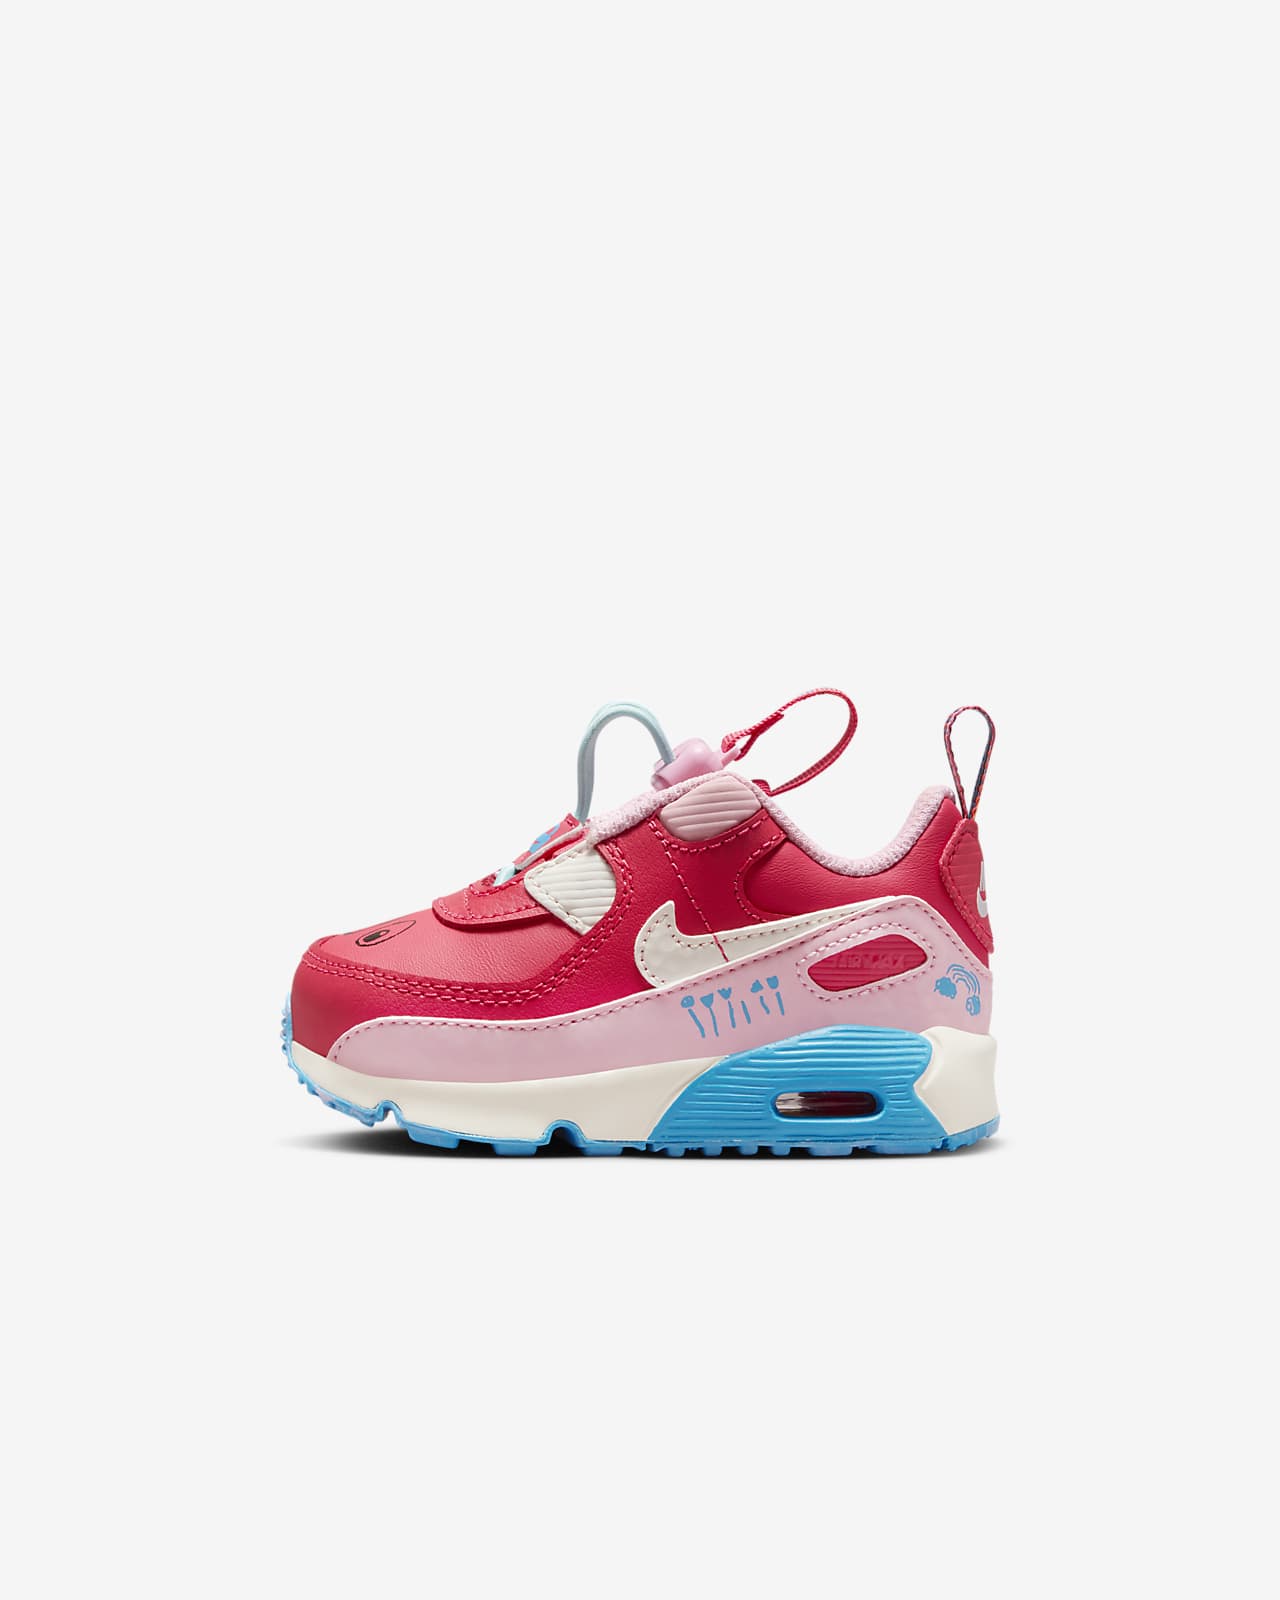 theater violist dosis Nike Air Max 90 Toggle Schoenen voor baby's/peuters. Nike BE